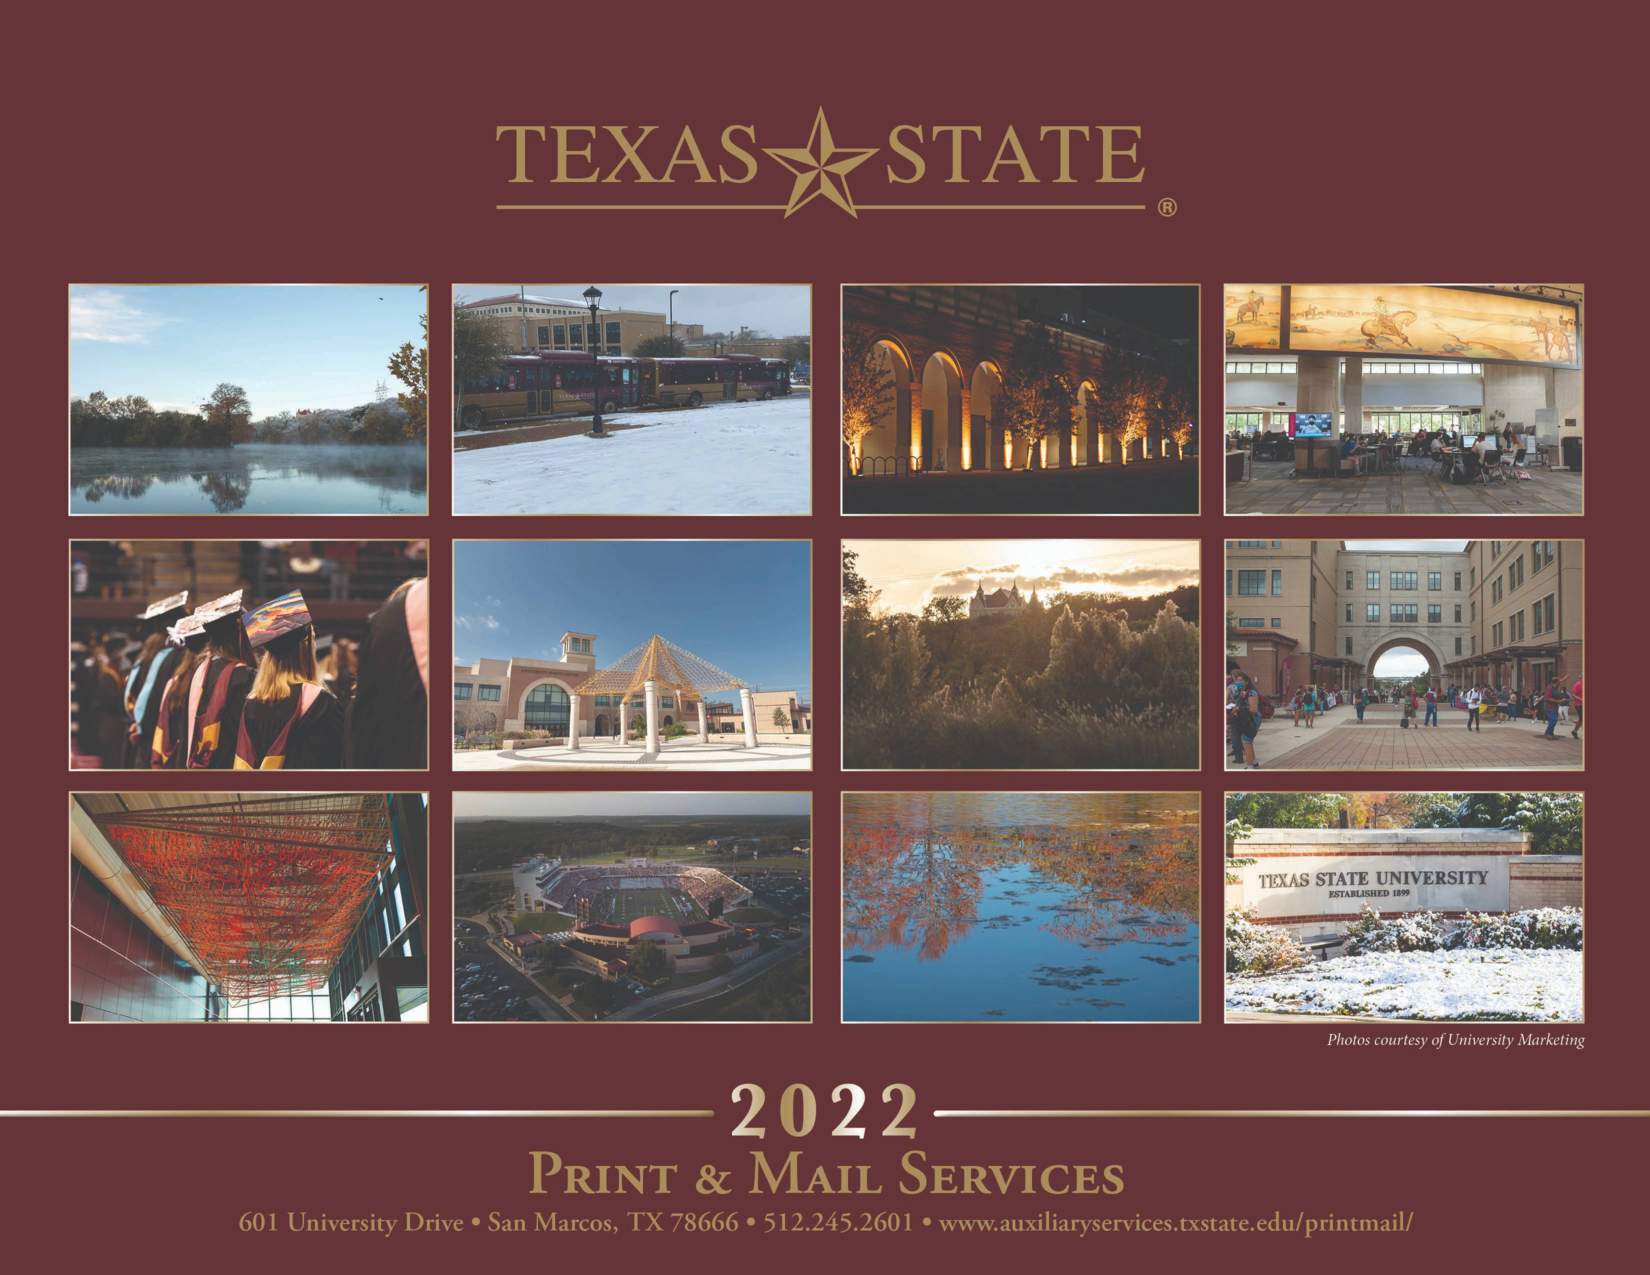 Texas State 2022 Calendar Texas State Calendars : Print & Mail Services : Texas State University